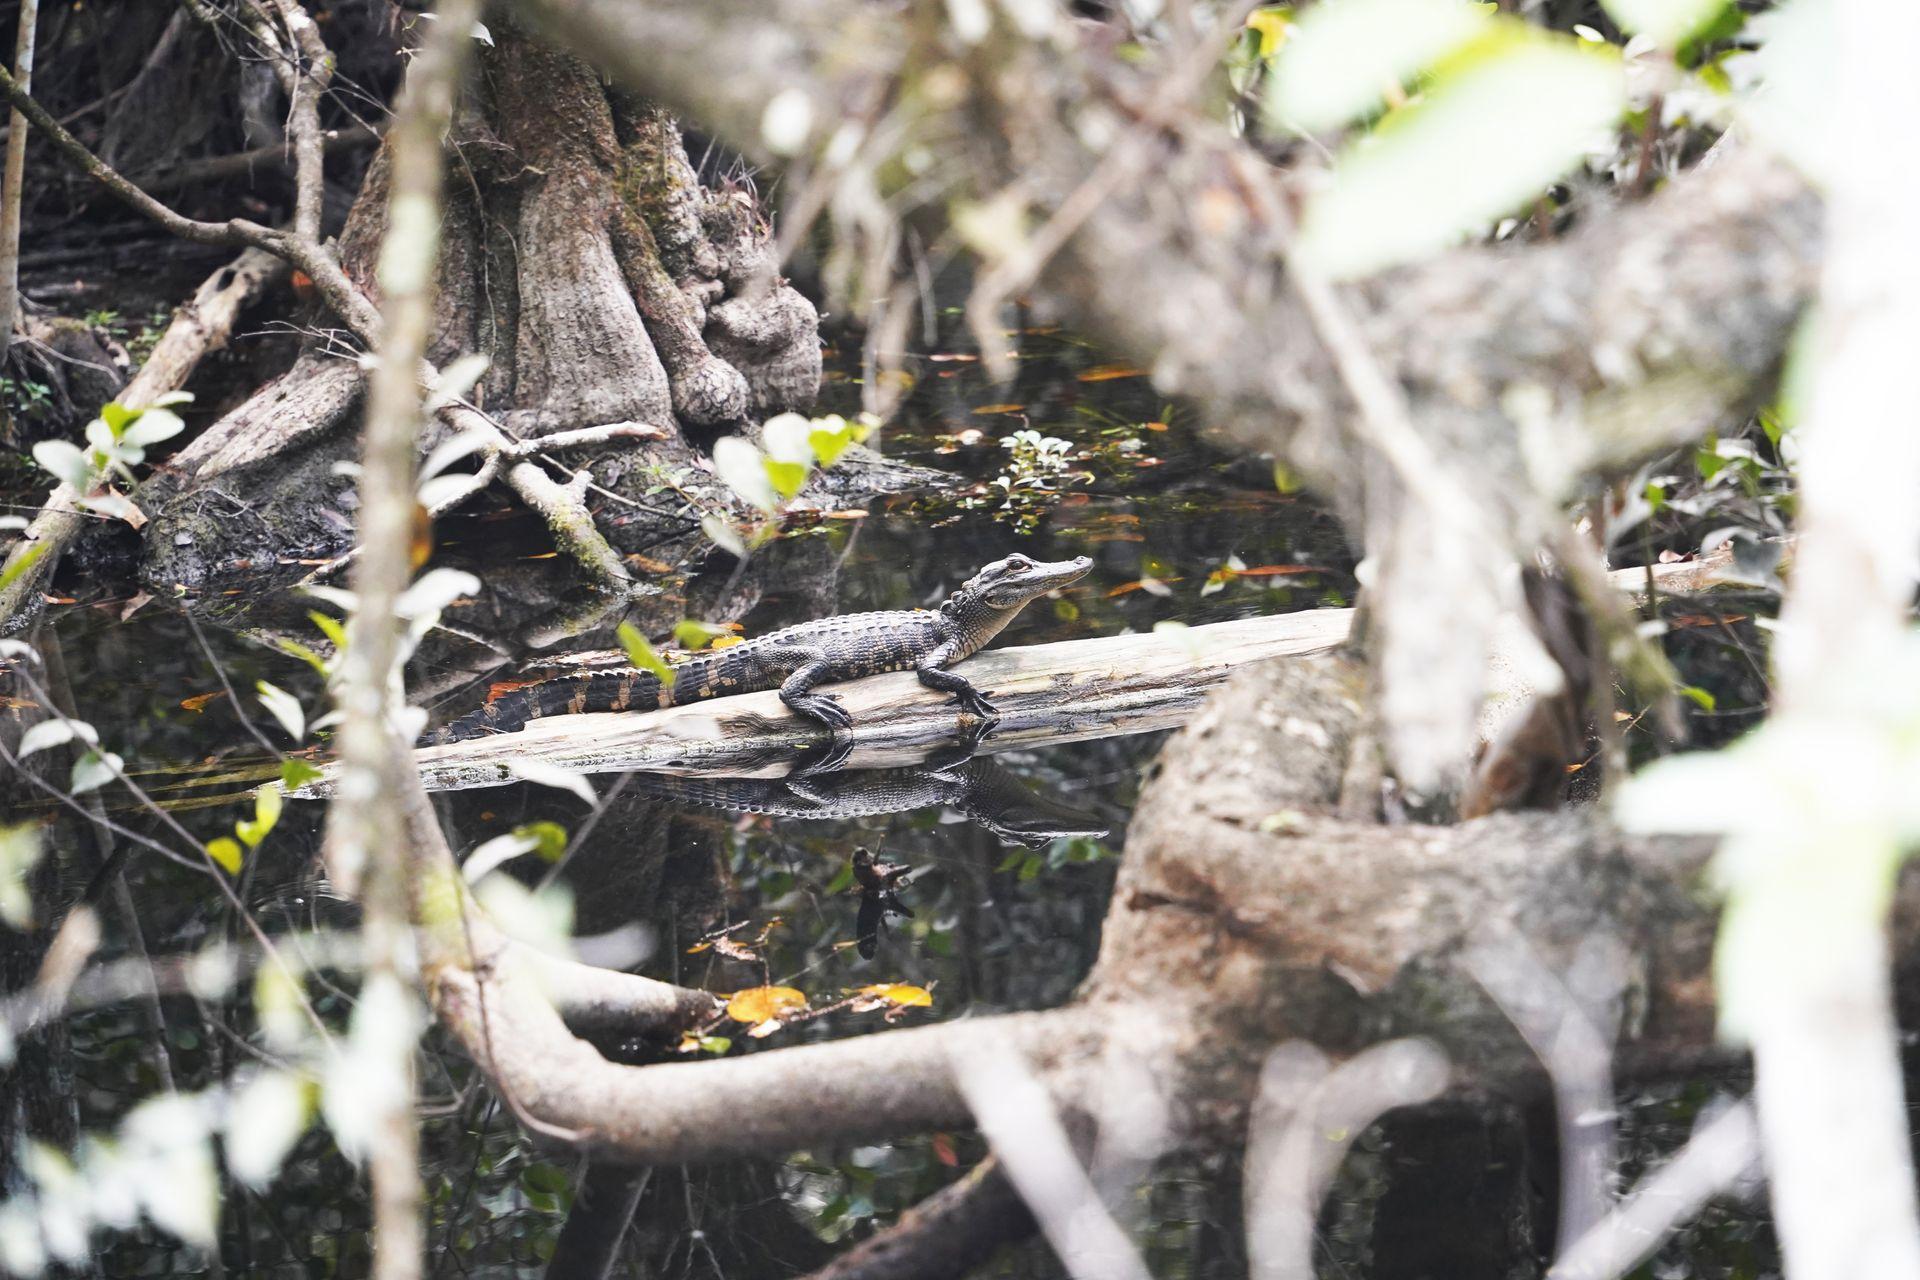 A baby alligator sits on a log that floats in the water. A view from the Scenic Loop Drive.